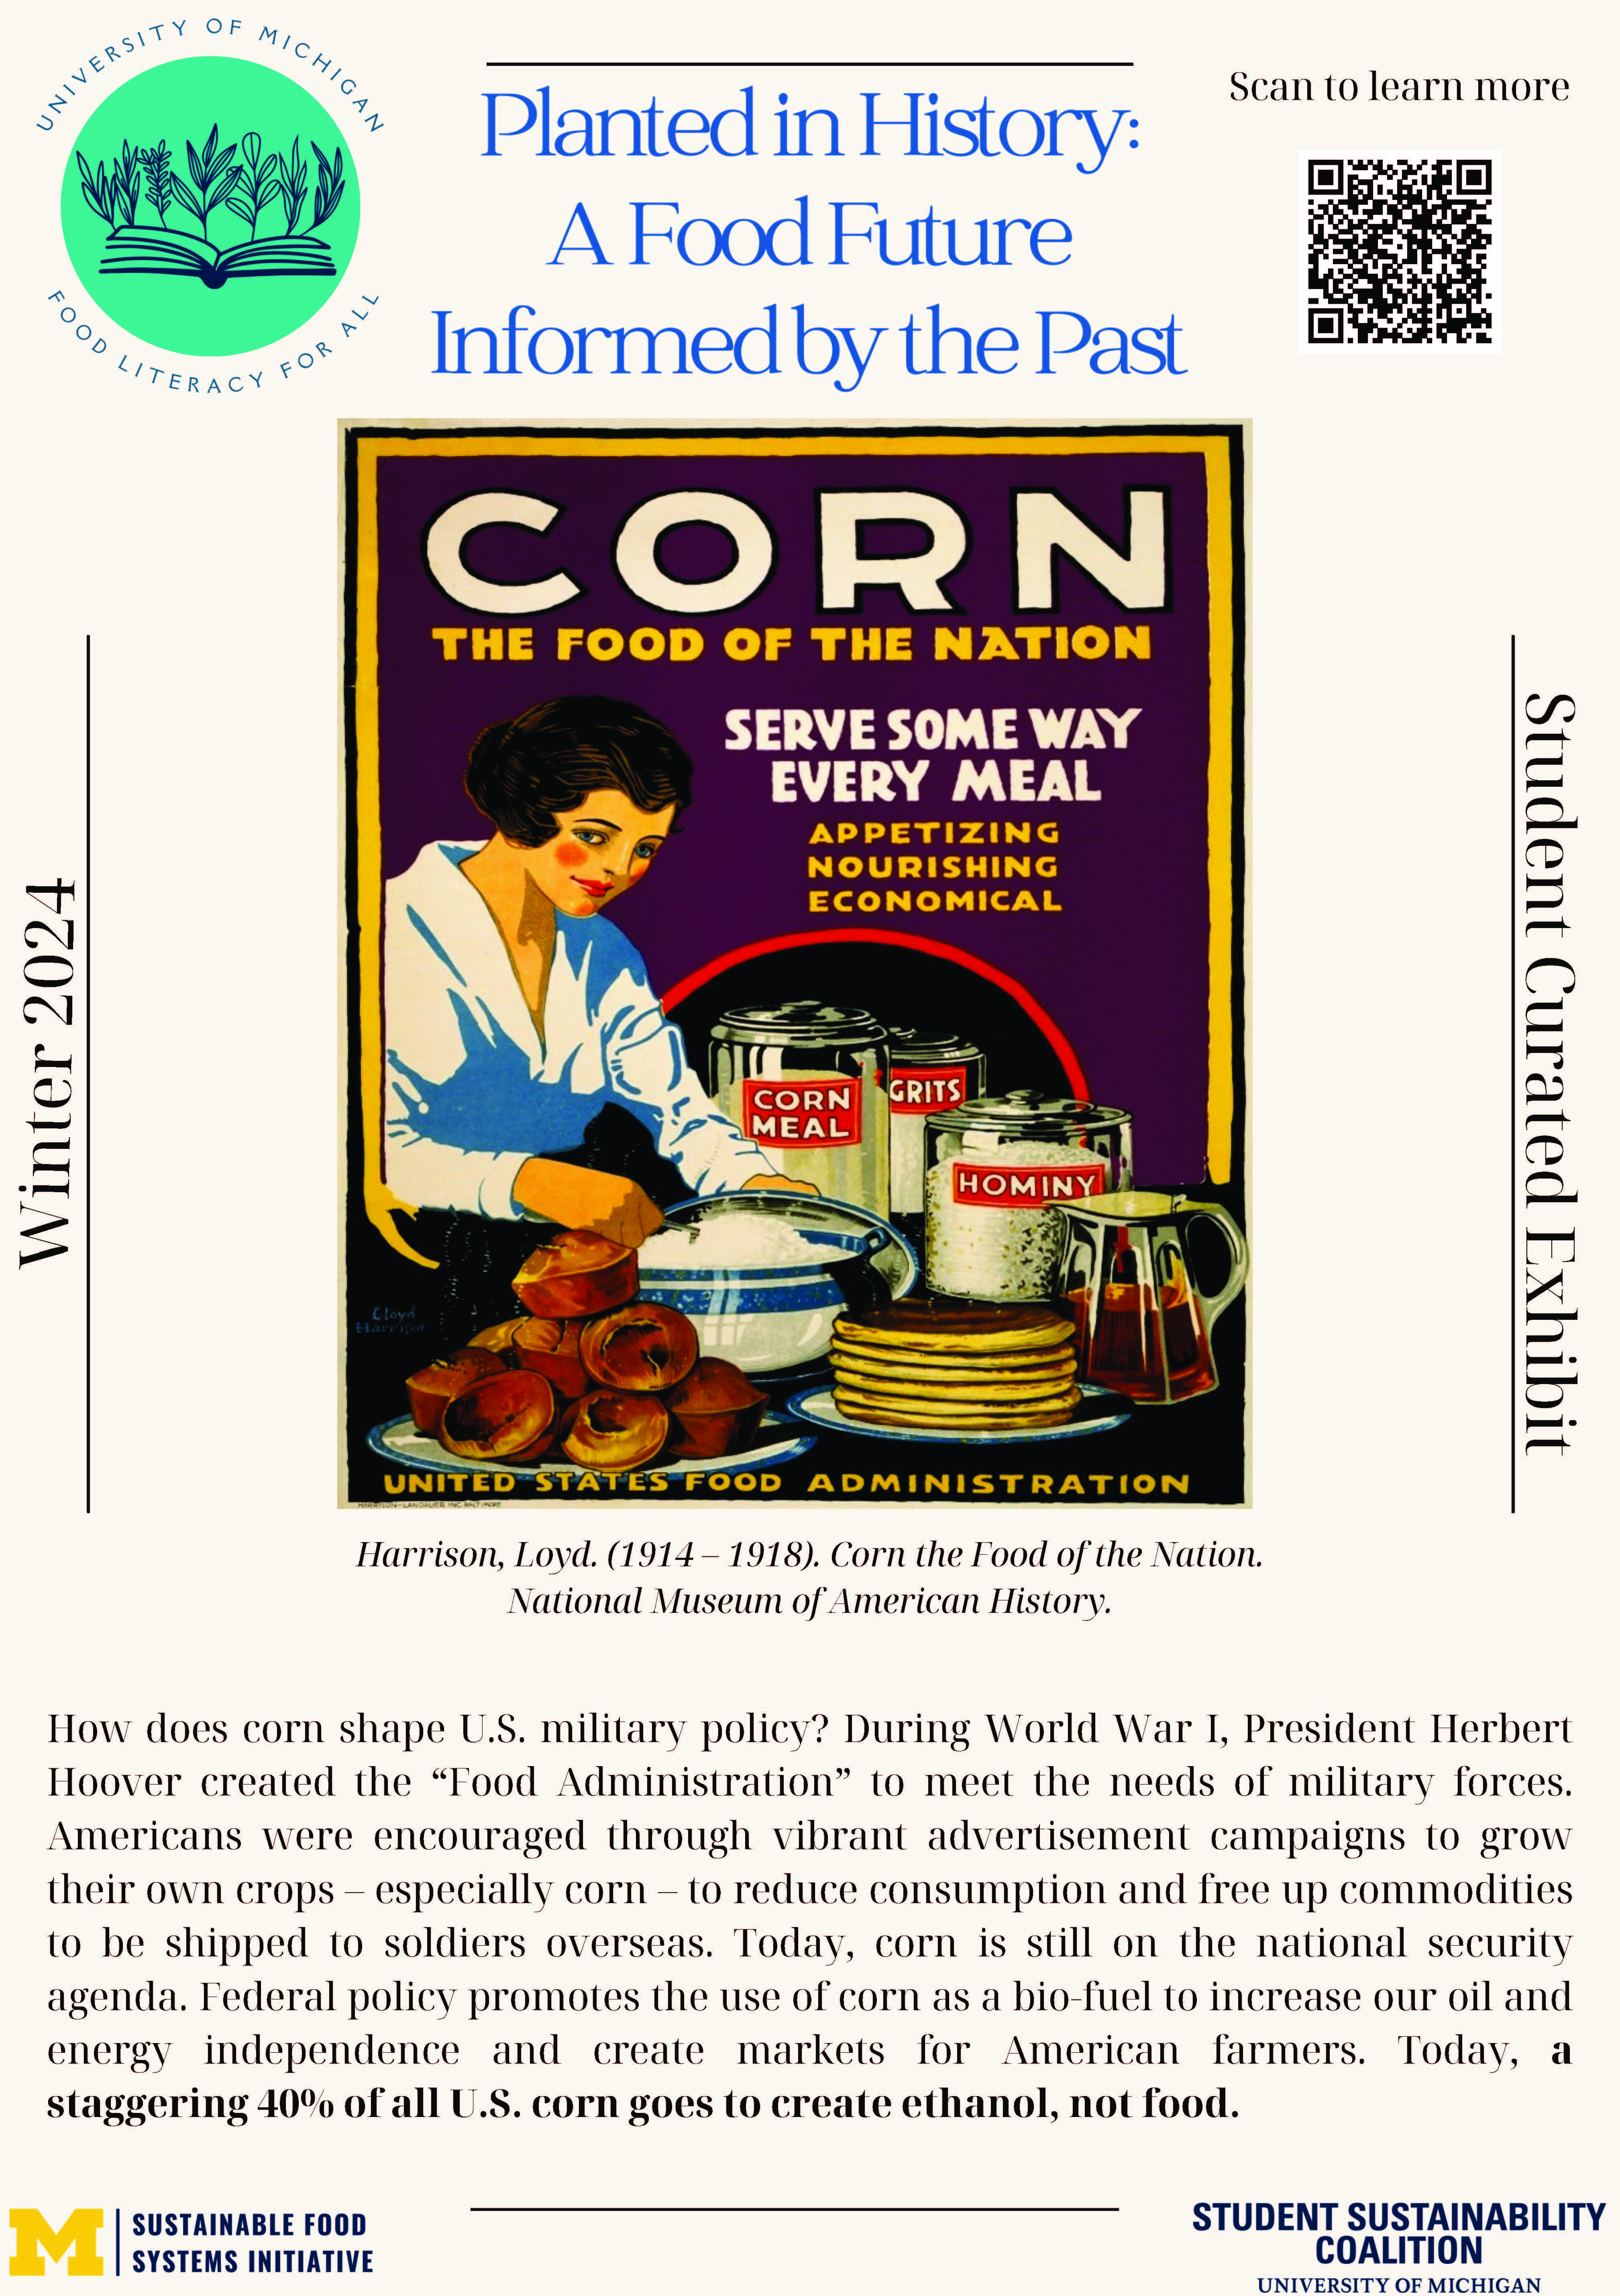 Poster highlighting the cover of a government publication titled "Corn, The Food of the Nation" (1914-1918), showing a dark-haired woman in a white blouse at a counter with pots of corn meal, grits, and hominy, as well as plates of pancakes. The main text is in the caption. 